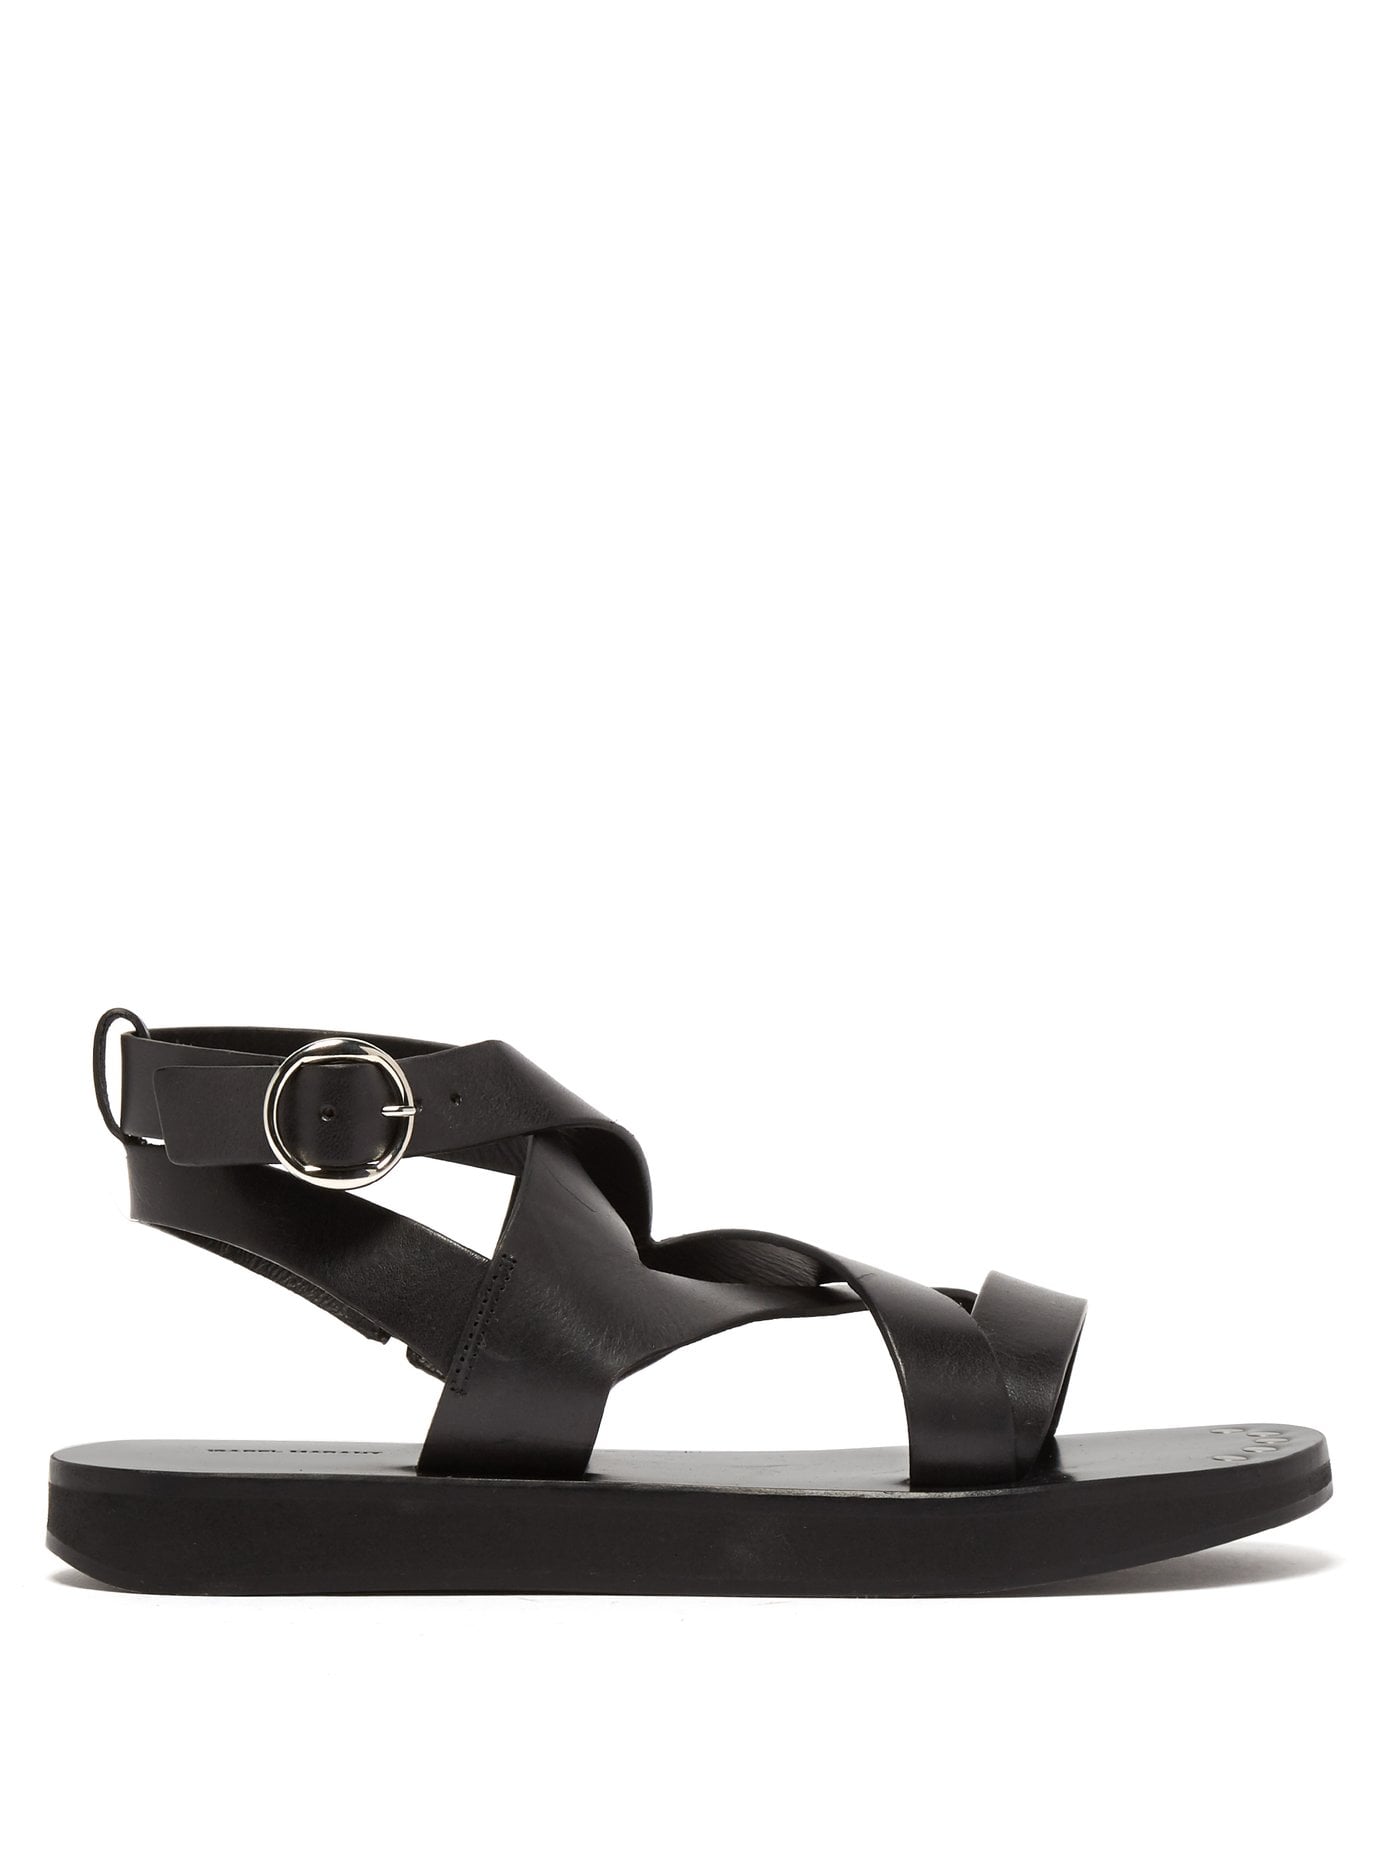 Comfortable Casual Sandals | Fashion UK